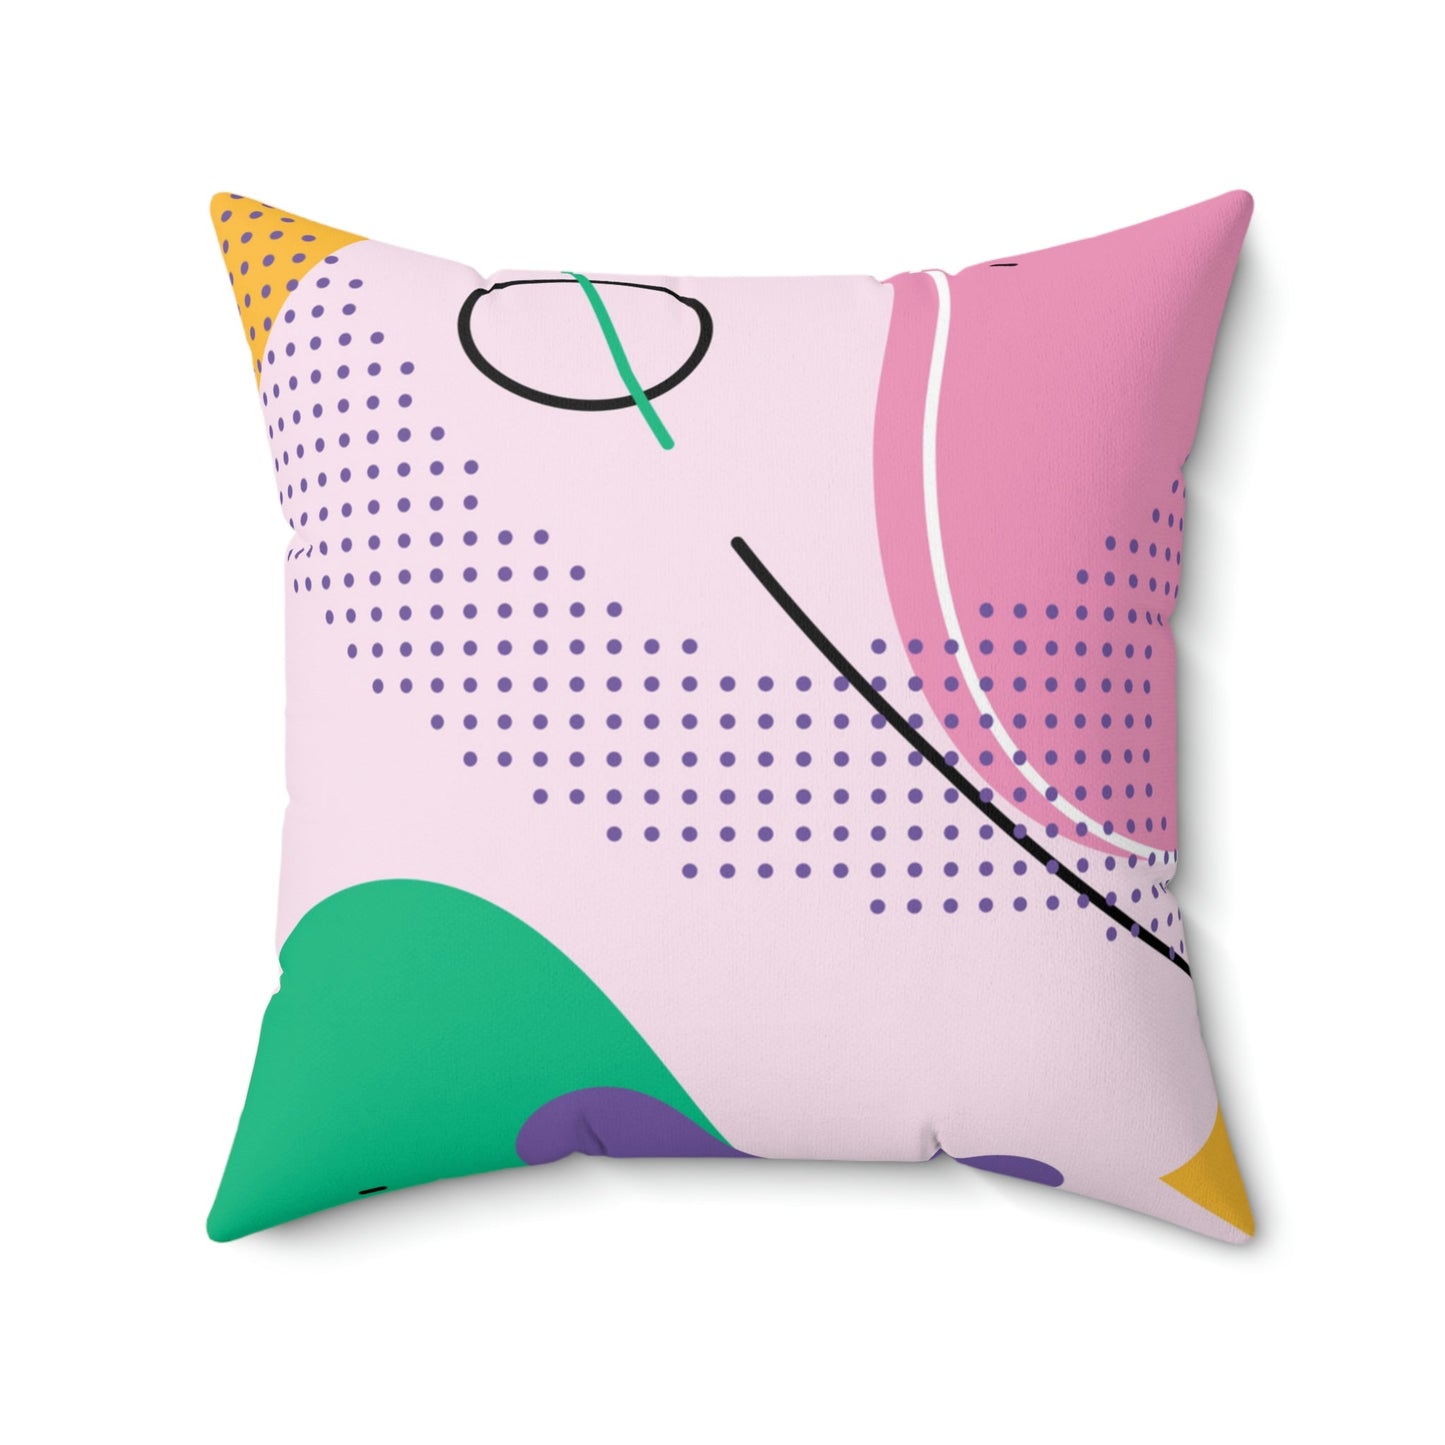 The Masterpiece Square Pillow Home Decor Pink Sweetheart